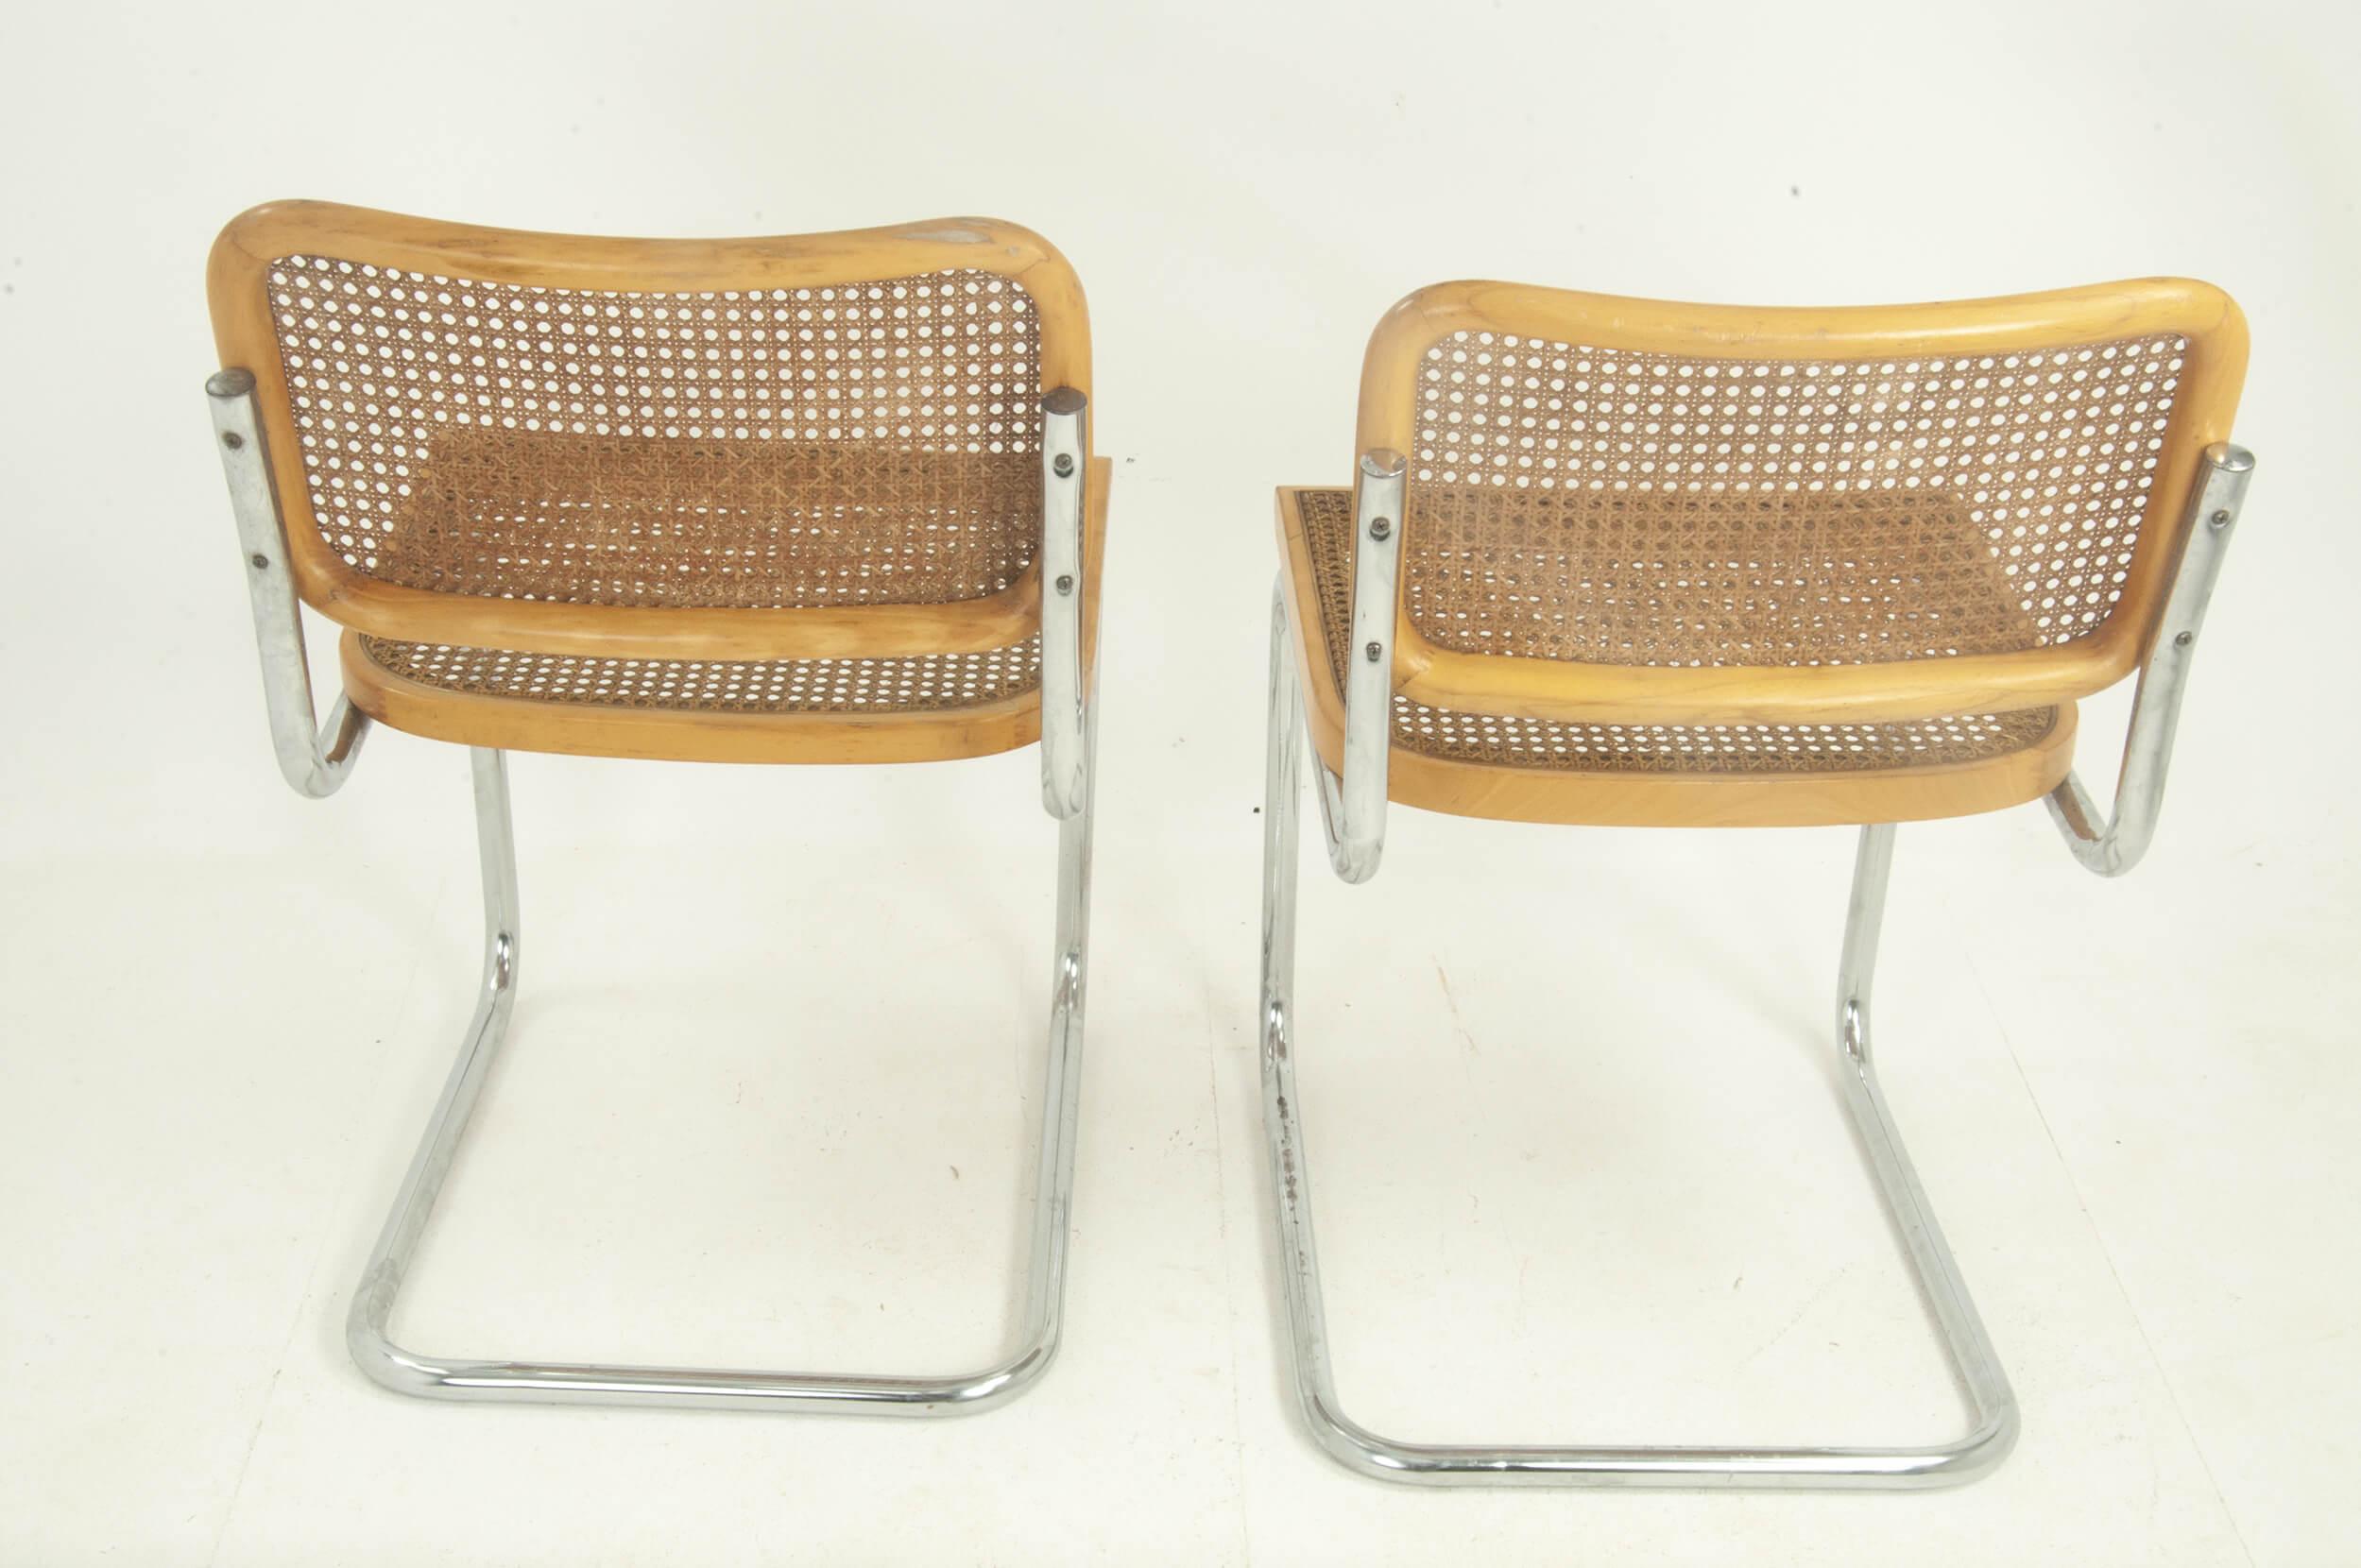 Pair of chairs by Marcel Breuer, Cesca model, beige color. The chrome and canes are in good condition.
A stamp, 